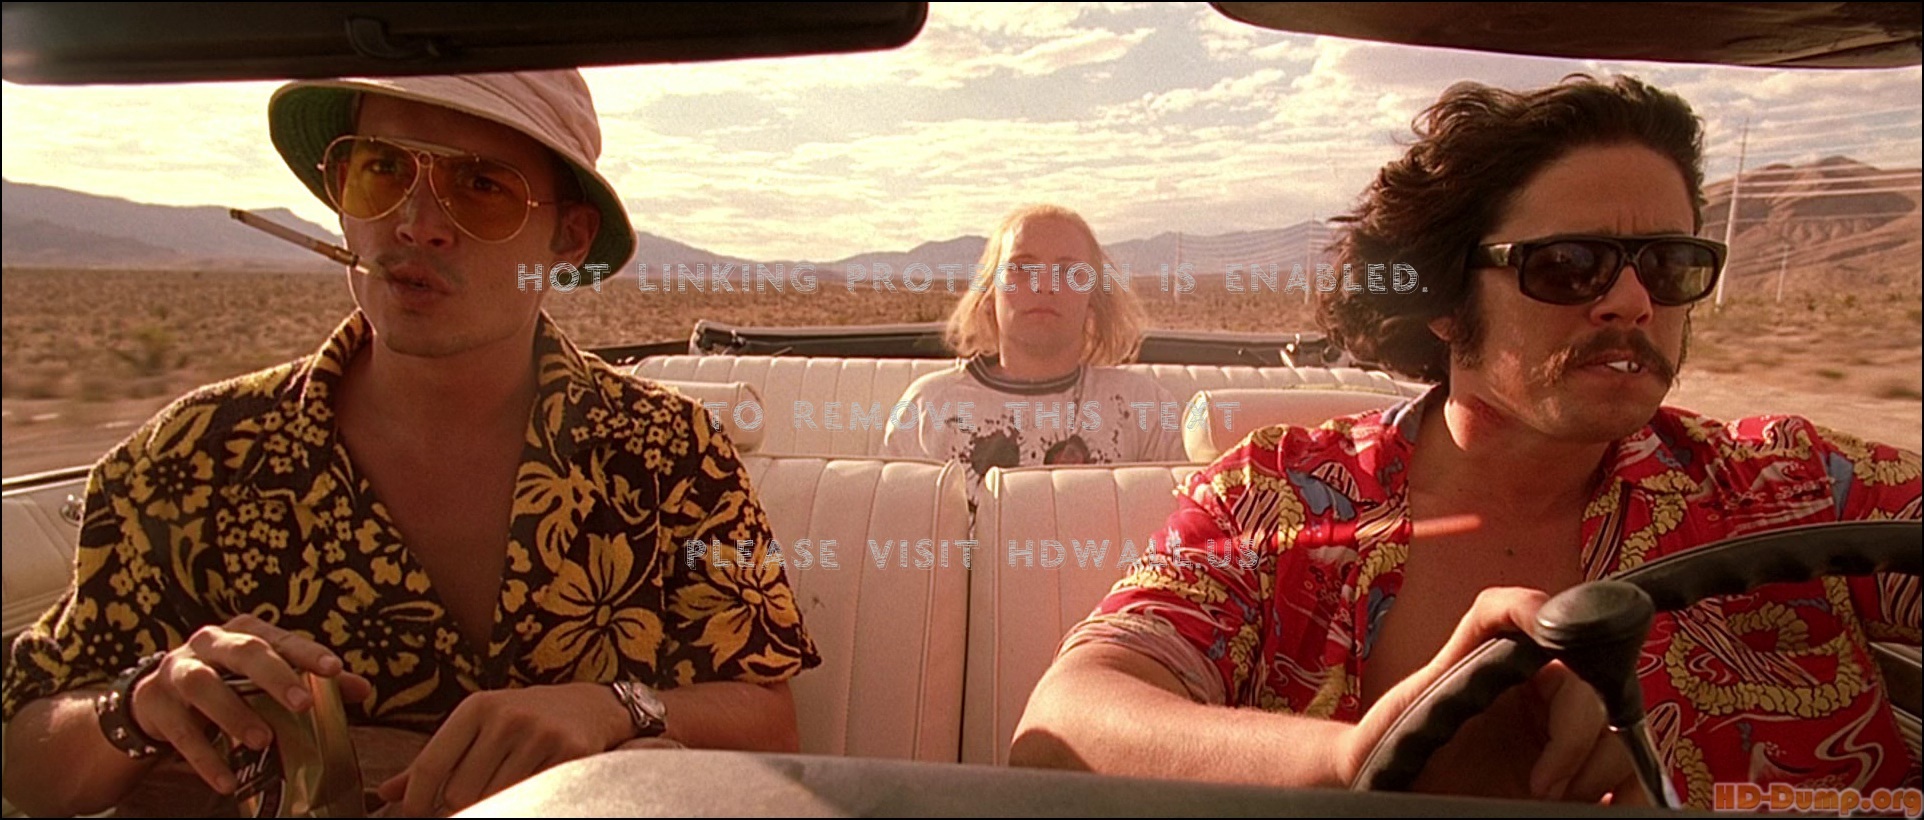 fear and loathing in las vegas wallpaper,travel,fun,vacation,vehicle,photography